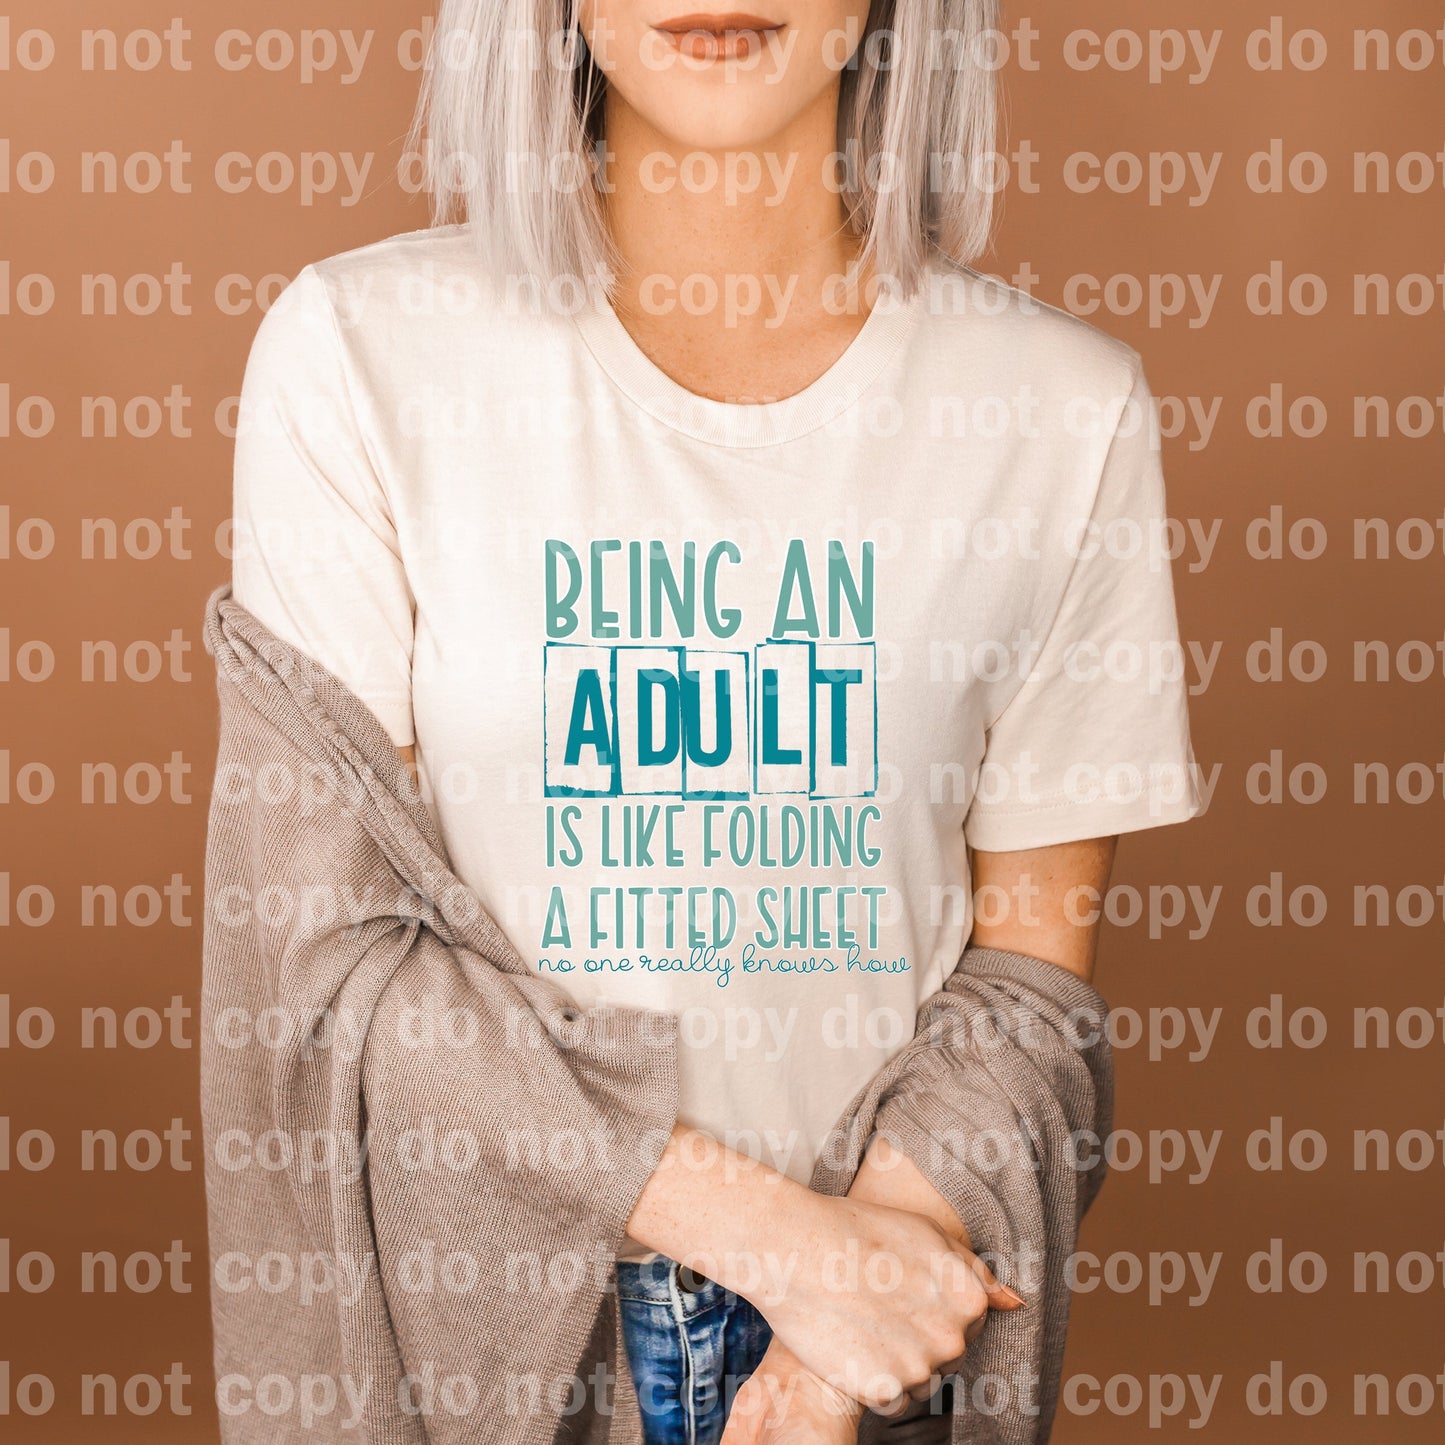 Being An Adult Is Like Folding A Fitted Sheet Full Color/One Color Dream Print or Sublimation Print